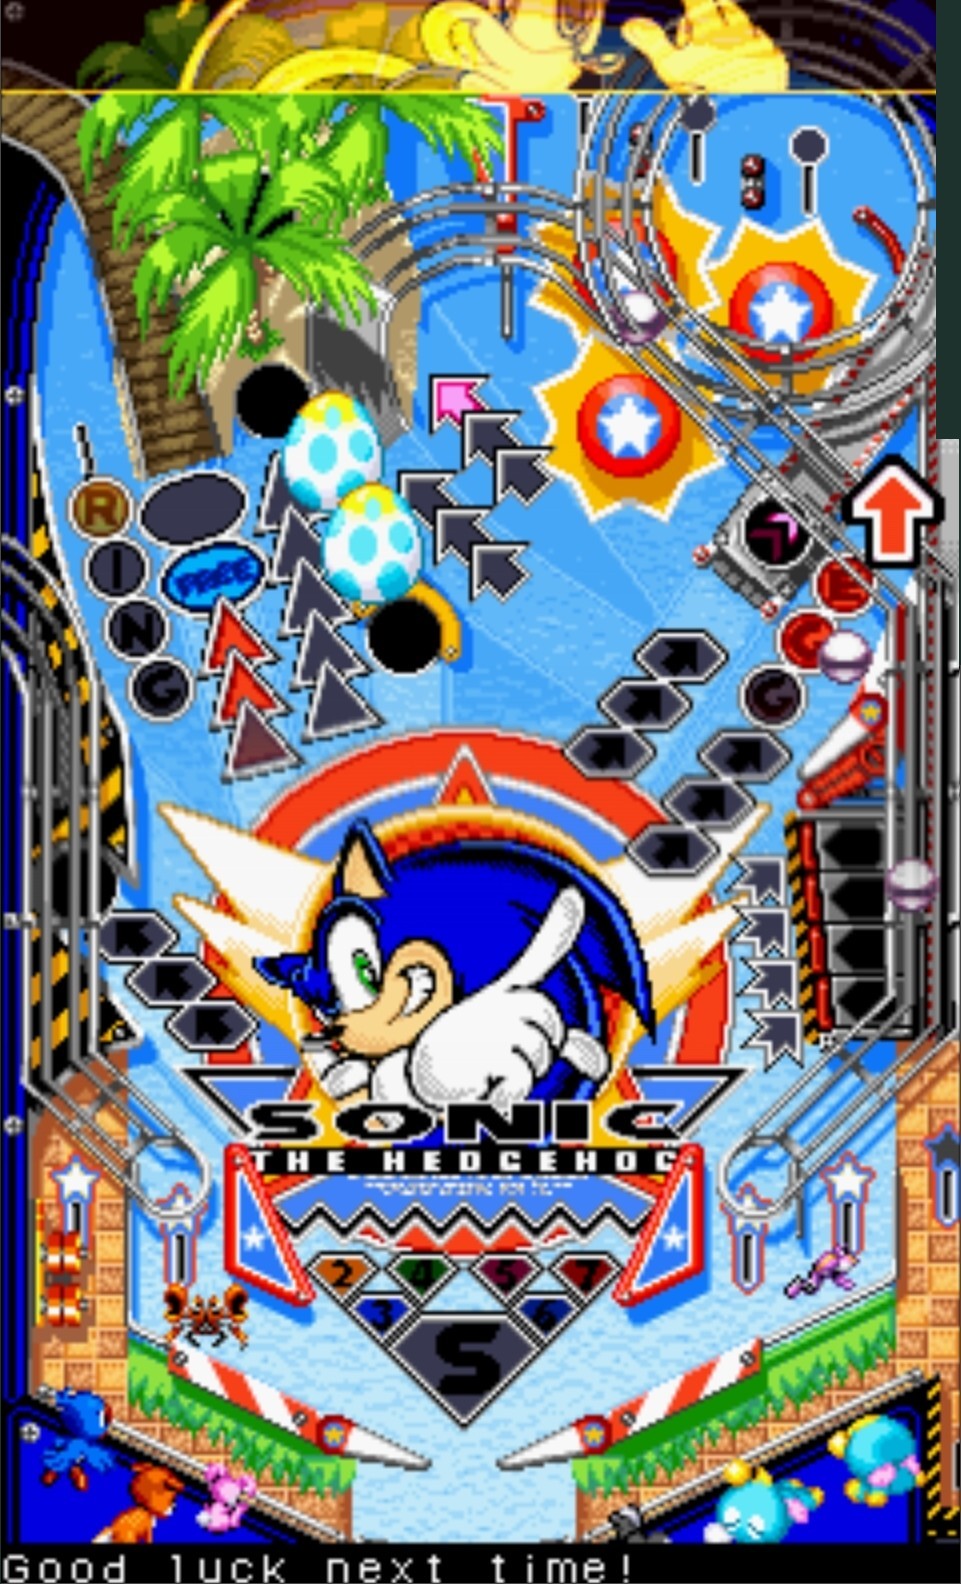 playfield of The Hedgehog (Sonic Pinball, Gameboy 2003)